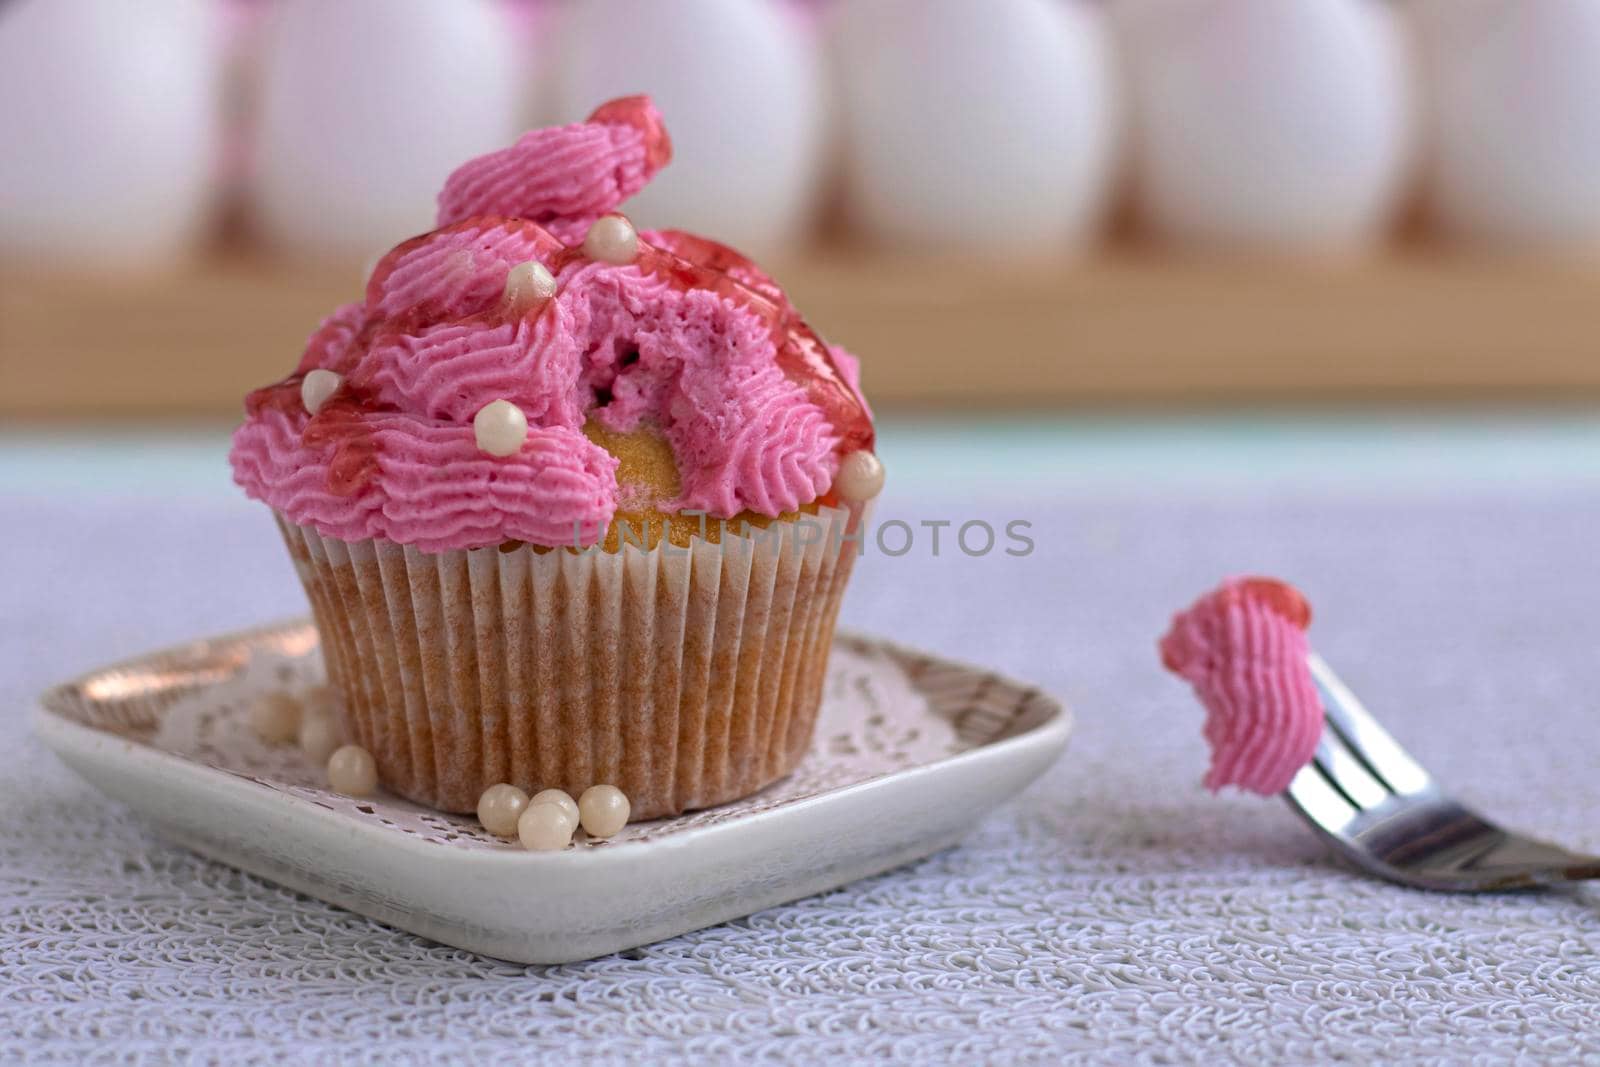 a cupcake beautifully decorated with pink cream and sugar decor stands on a square saucer on a light wooden background. A piece of muffin on a fork nearby. Sugar beads and fruit topping